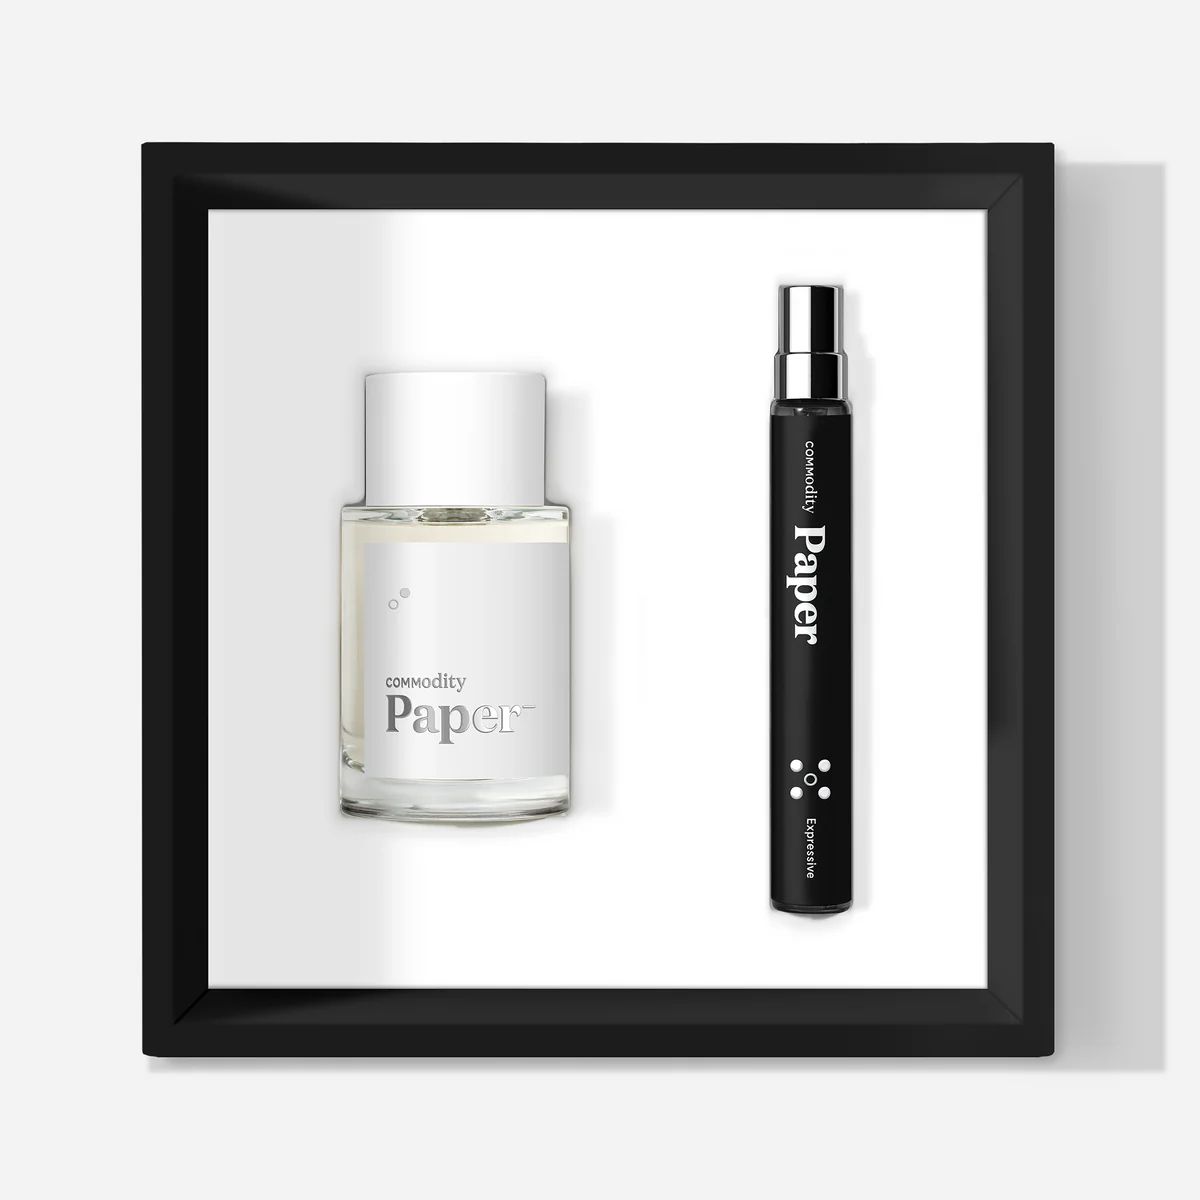 Best of Paper Duo Set | Commodity Fragrances (US)